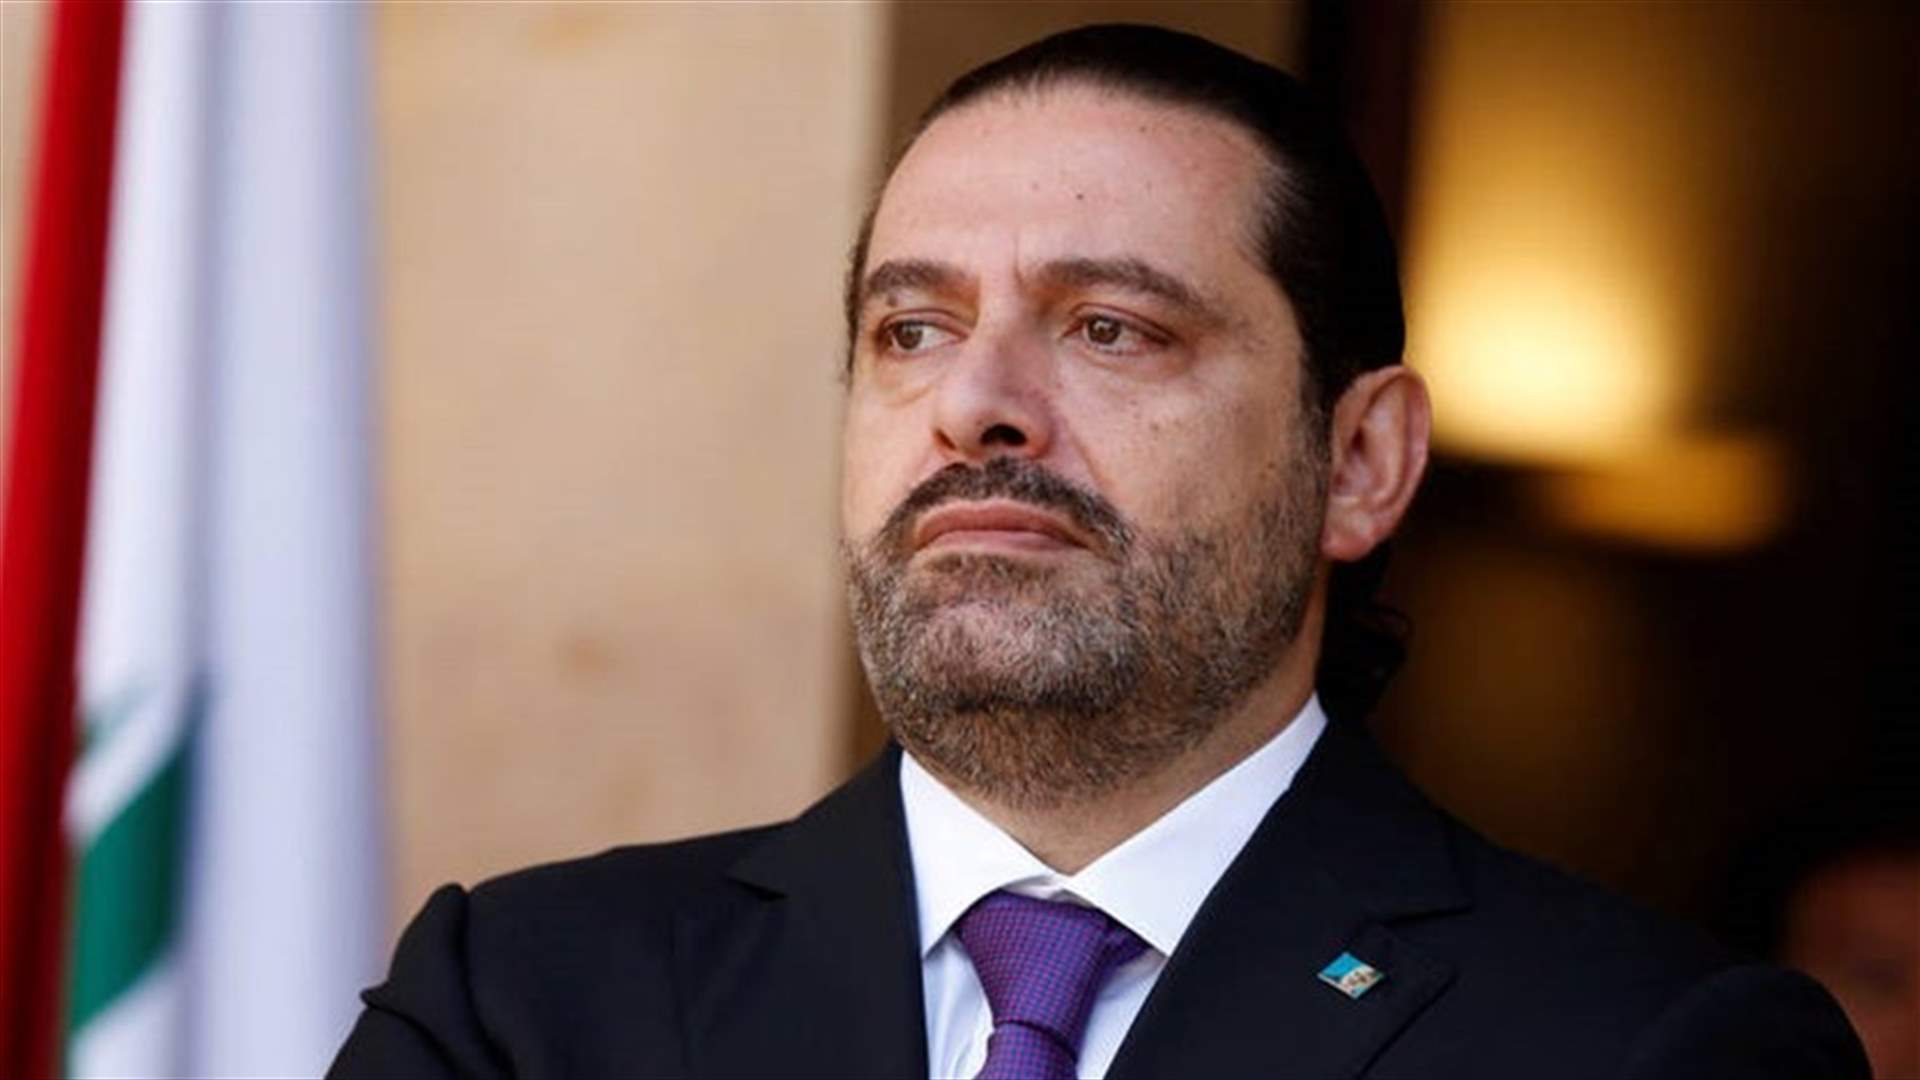 Sources to LBCI: Hariri told Bassil that he does not agree with al-Merhebi’s statement